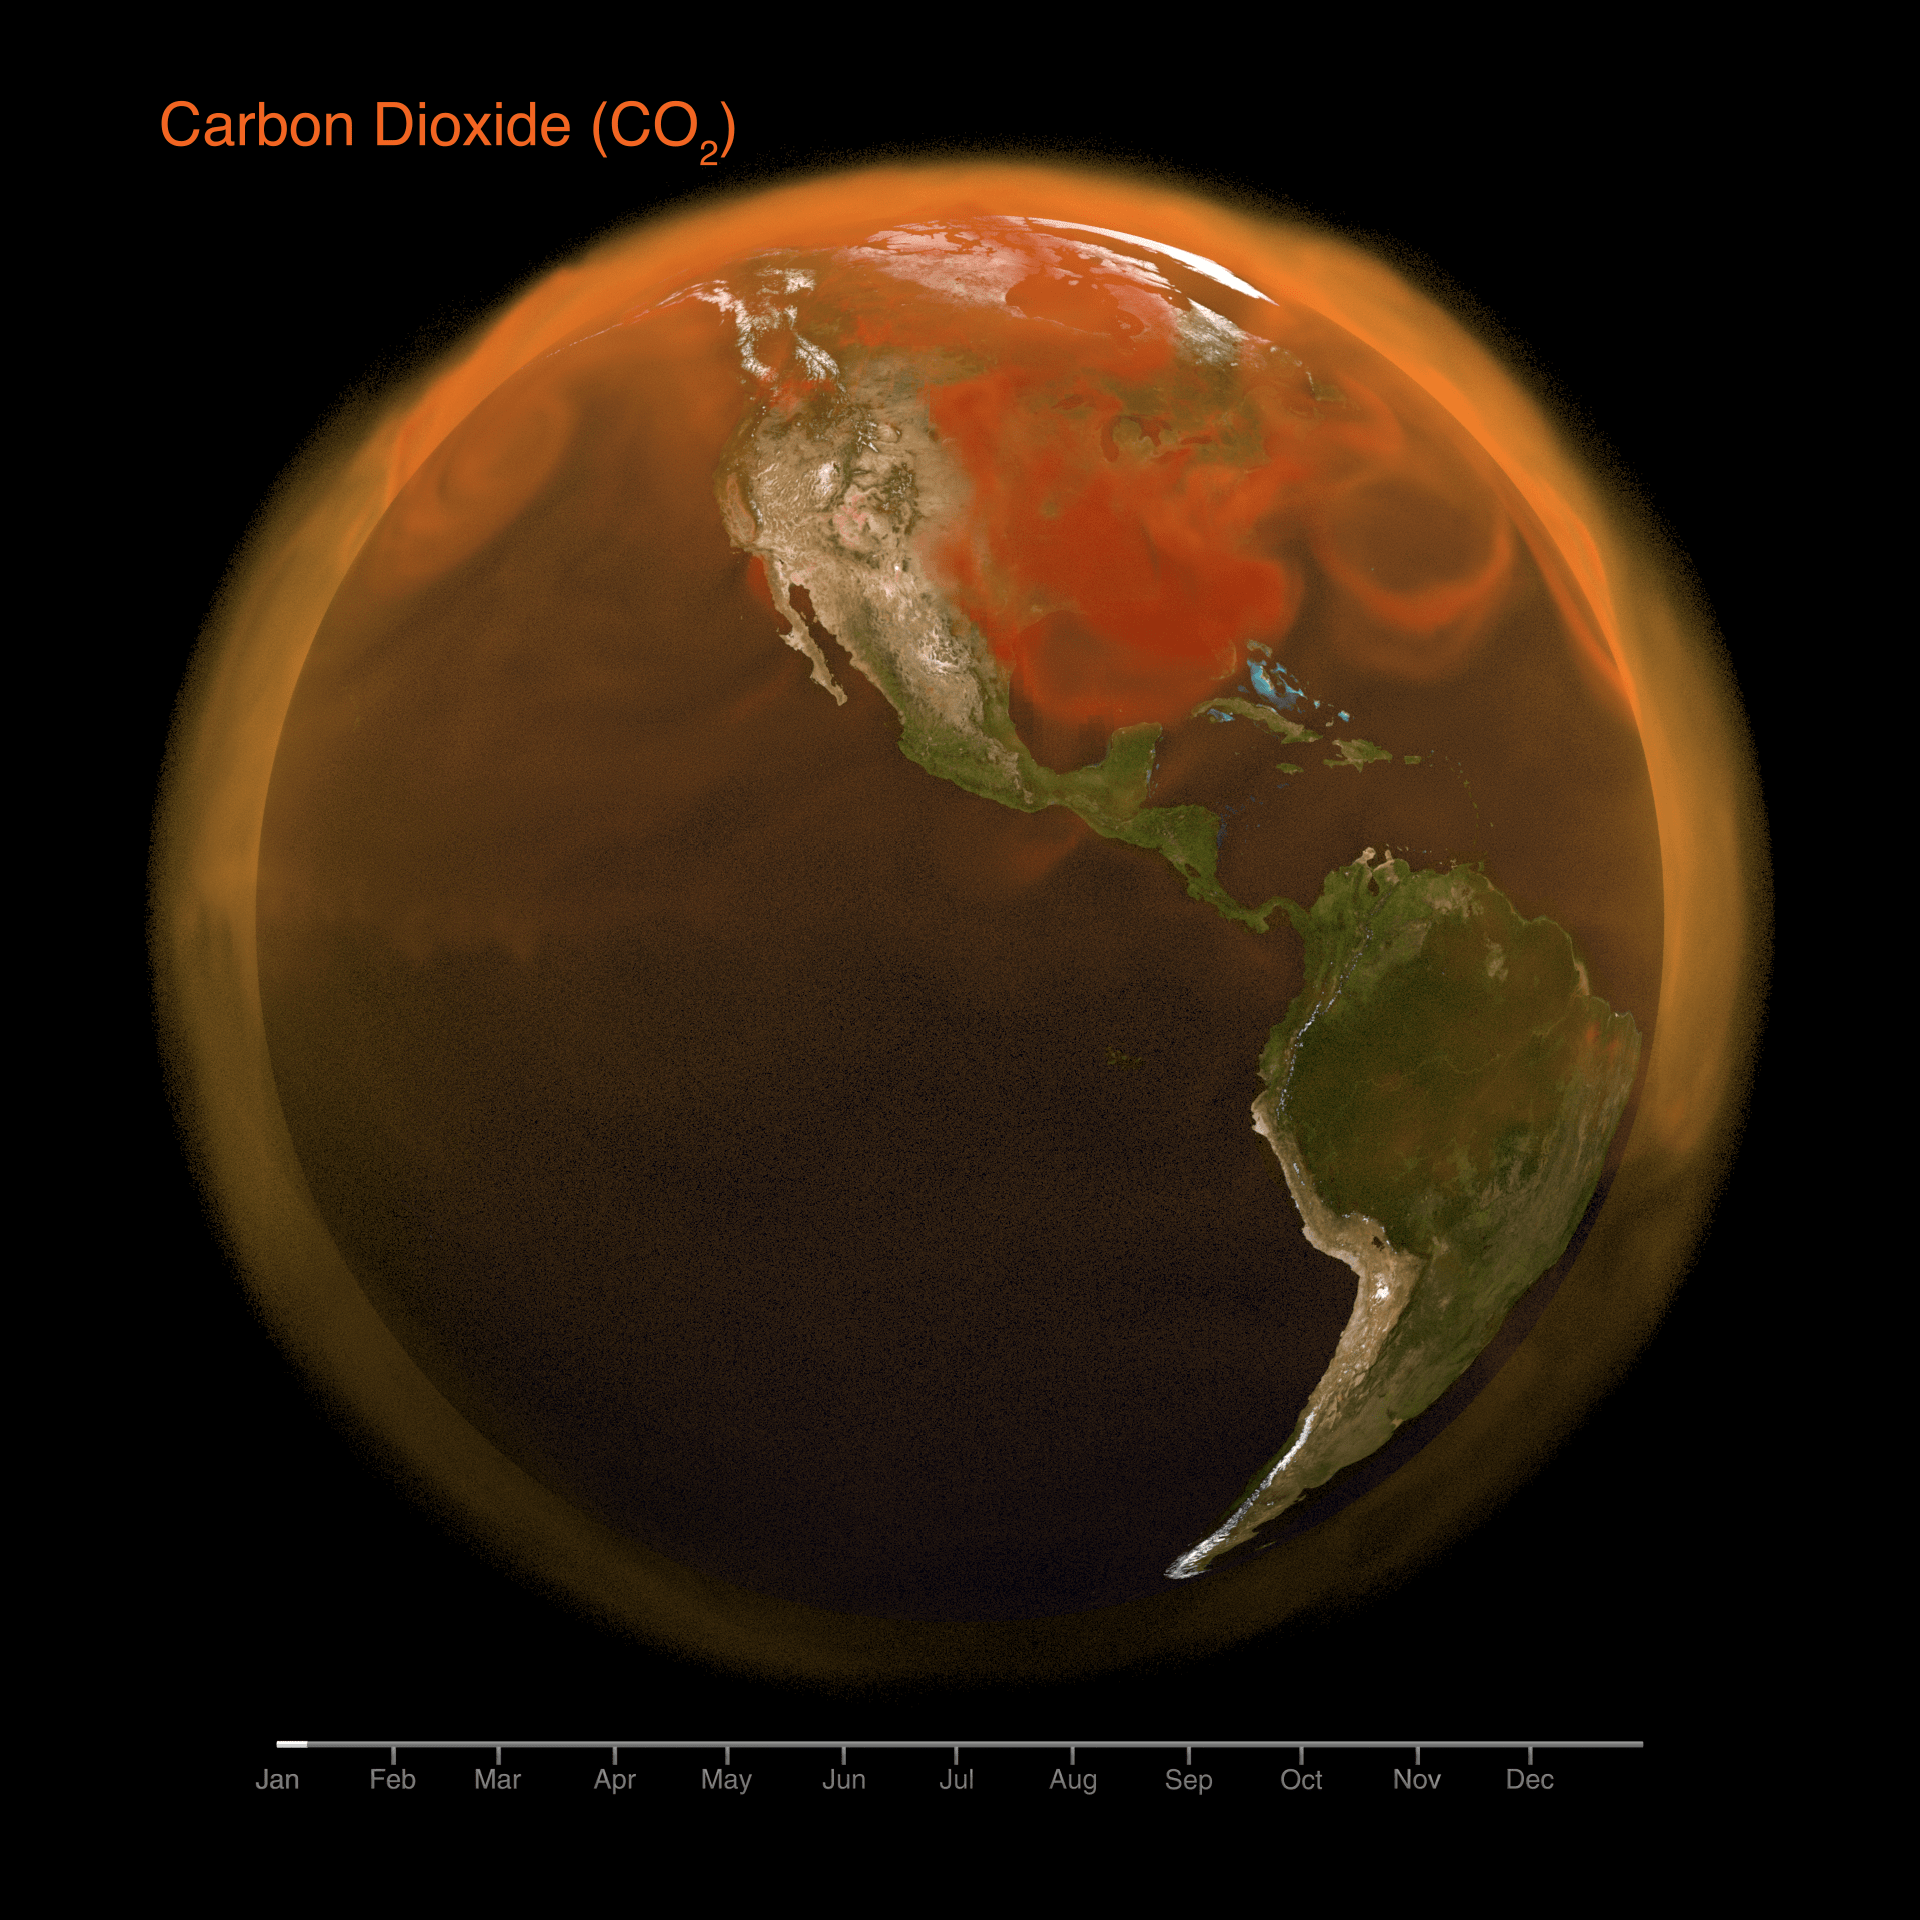 A Globe that is primarily facing the Americas and Pacific Ocean with an atmospheric overlay showing CO2 concentrations, with dense swirls over the United States